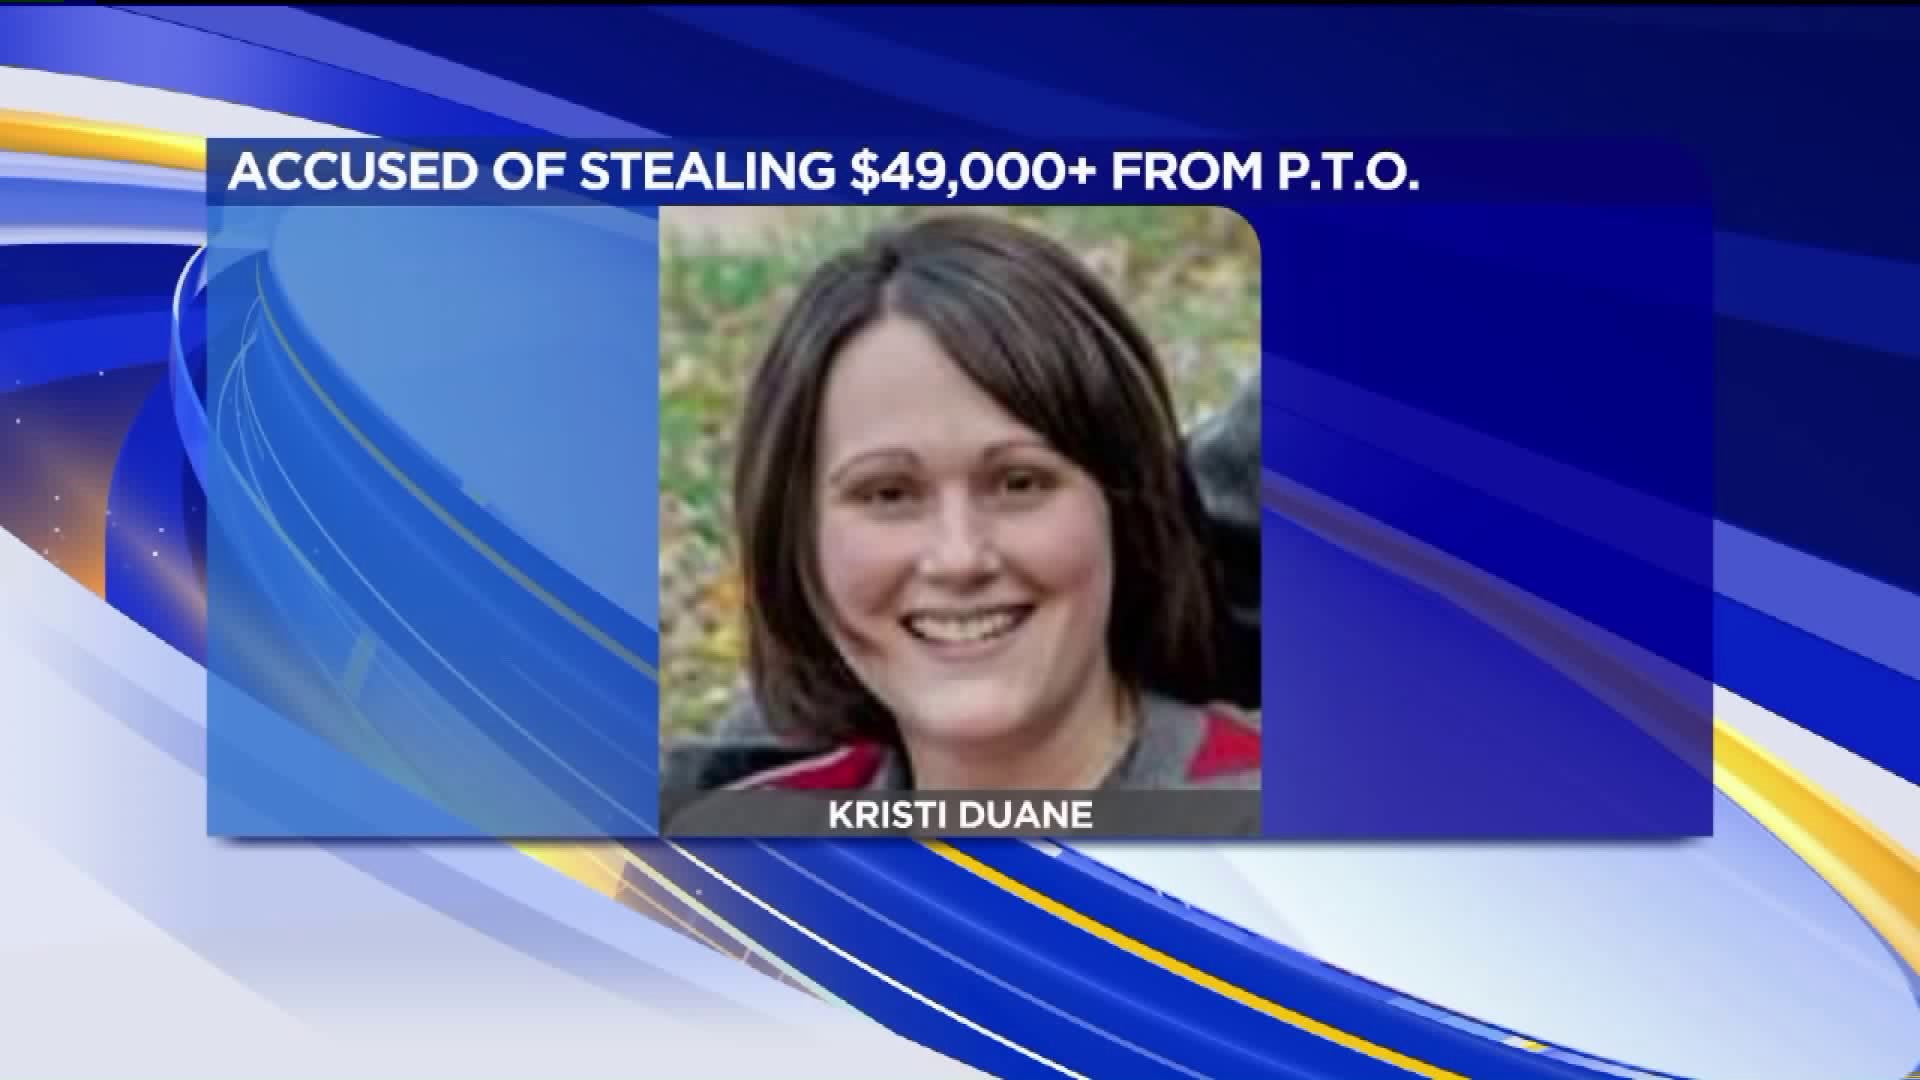 PTO Treasurer Charged with Theft, Forgery for Allegedly Stealing Funds from Organization